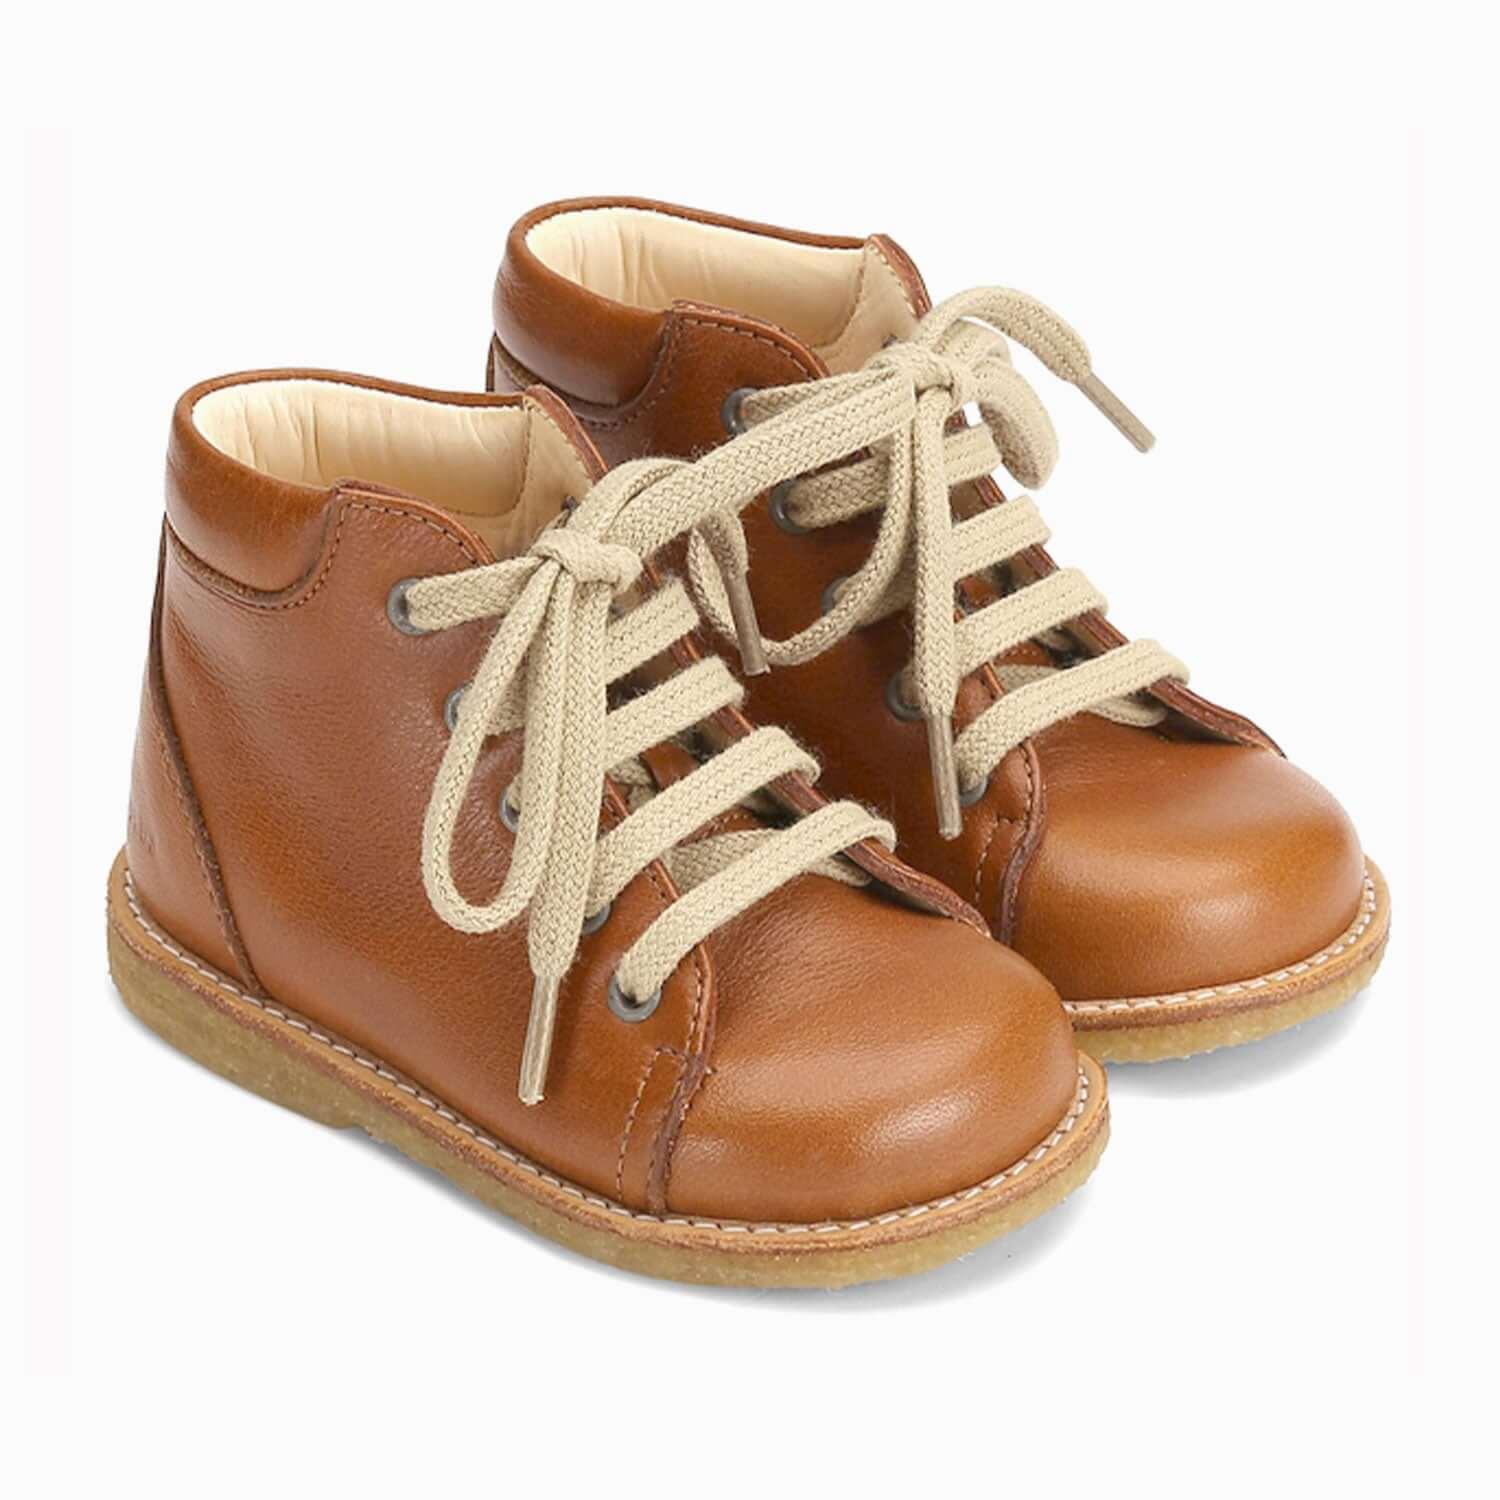 An image of Angulus Lace Up Leather Boots - Brown | Footwear | SmallSmart.co.uk EU22/UK6